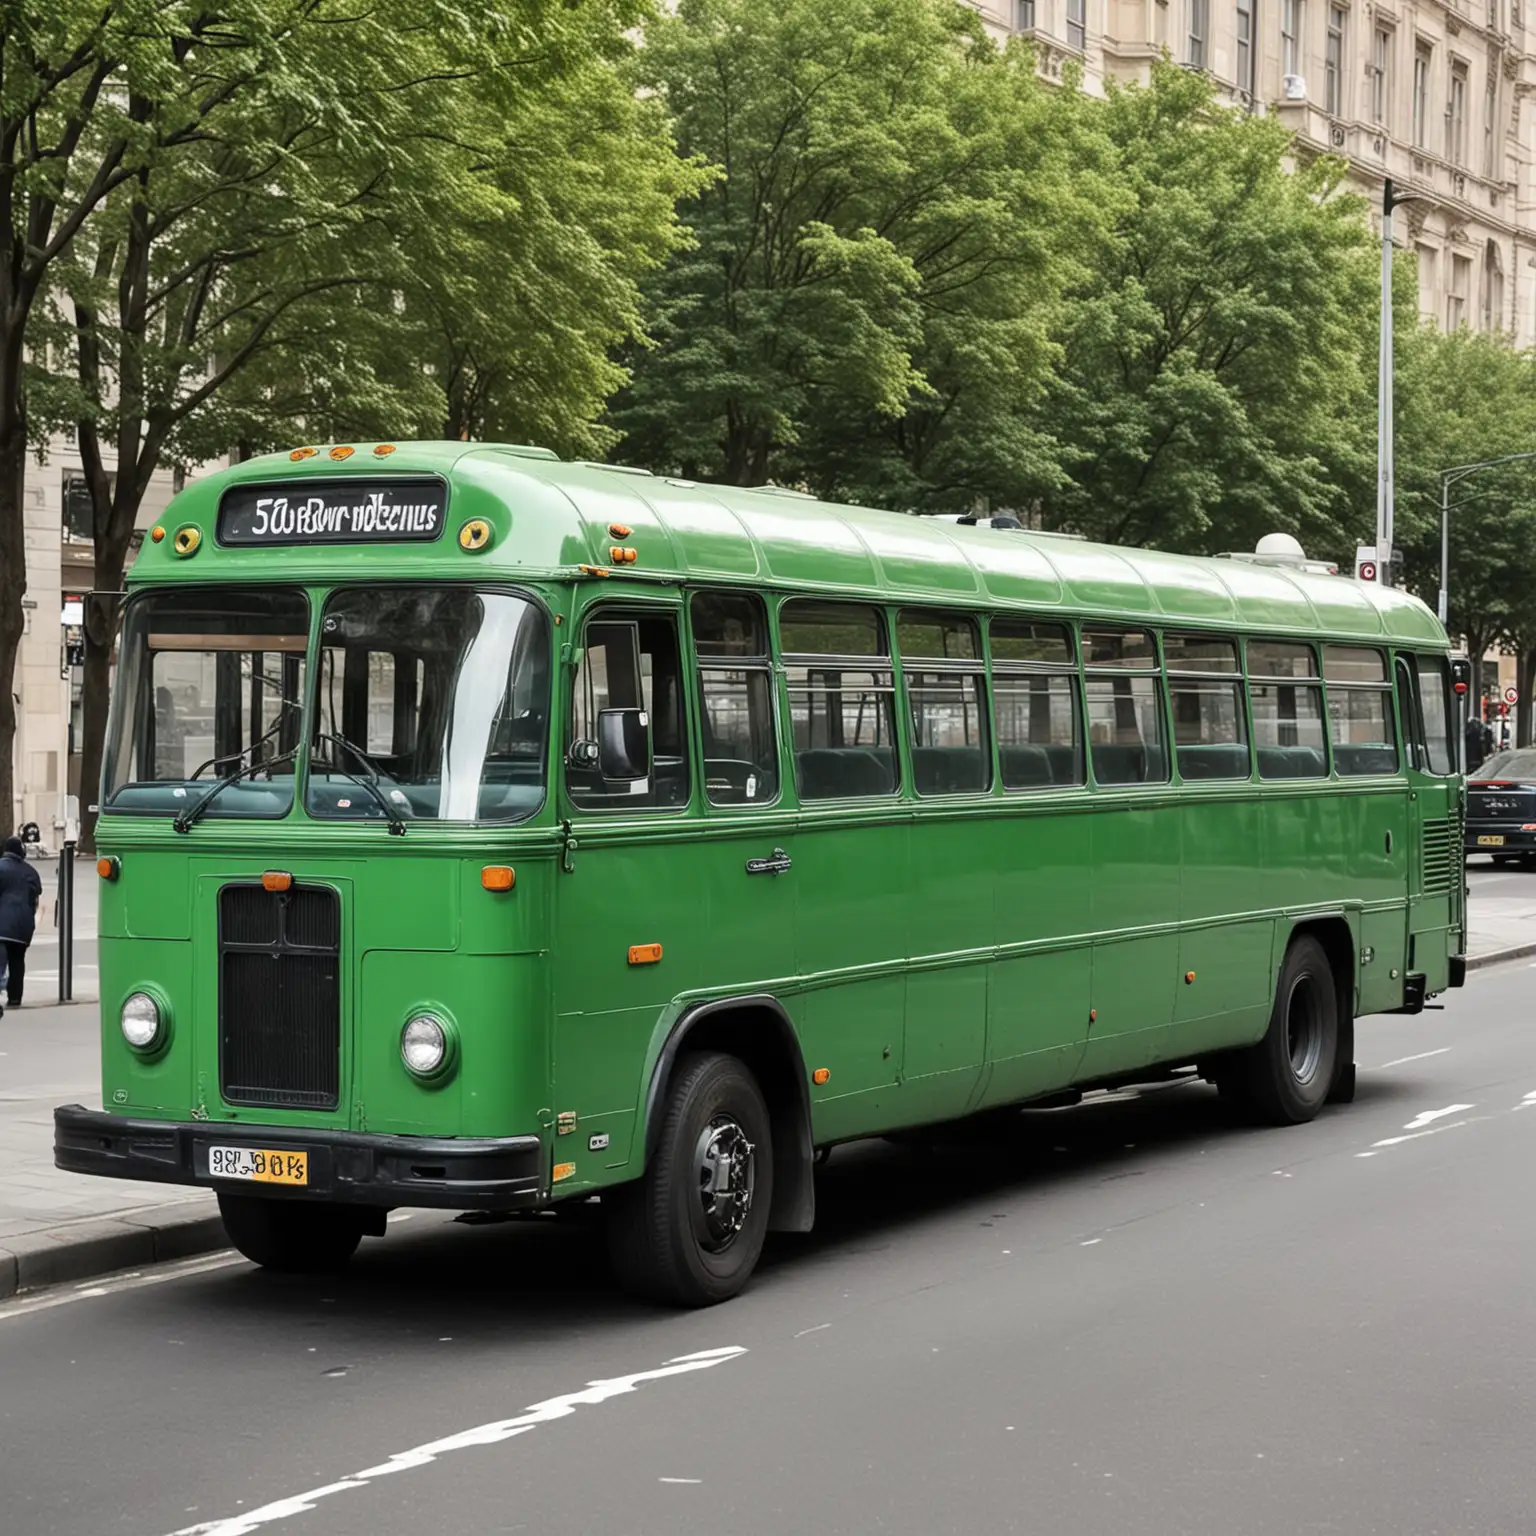 Vintage Green Bus on Countryside Road